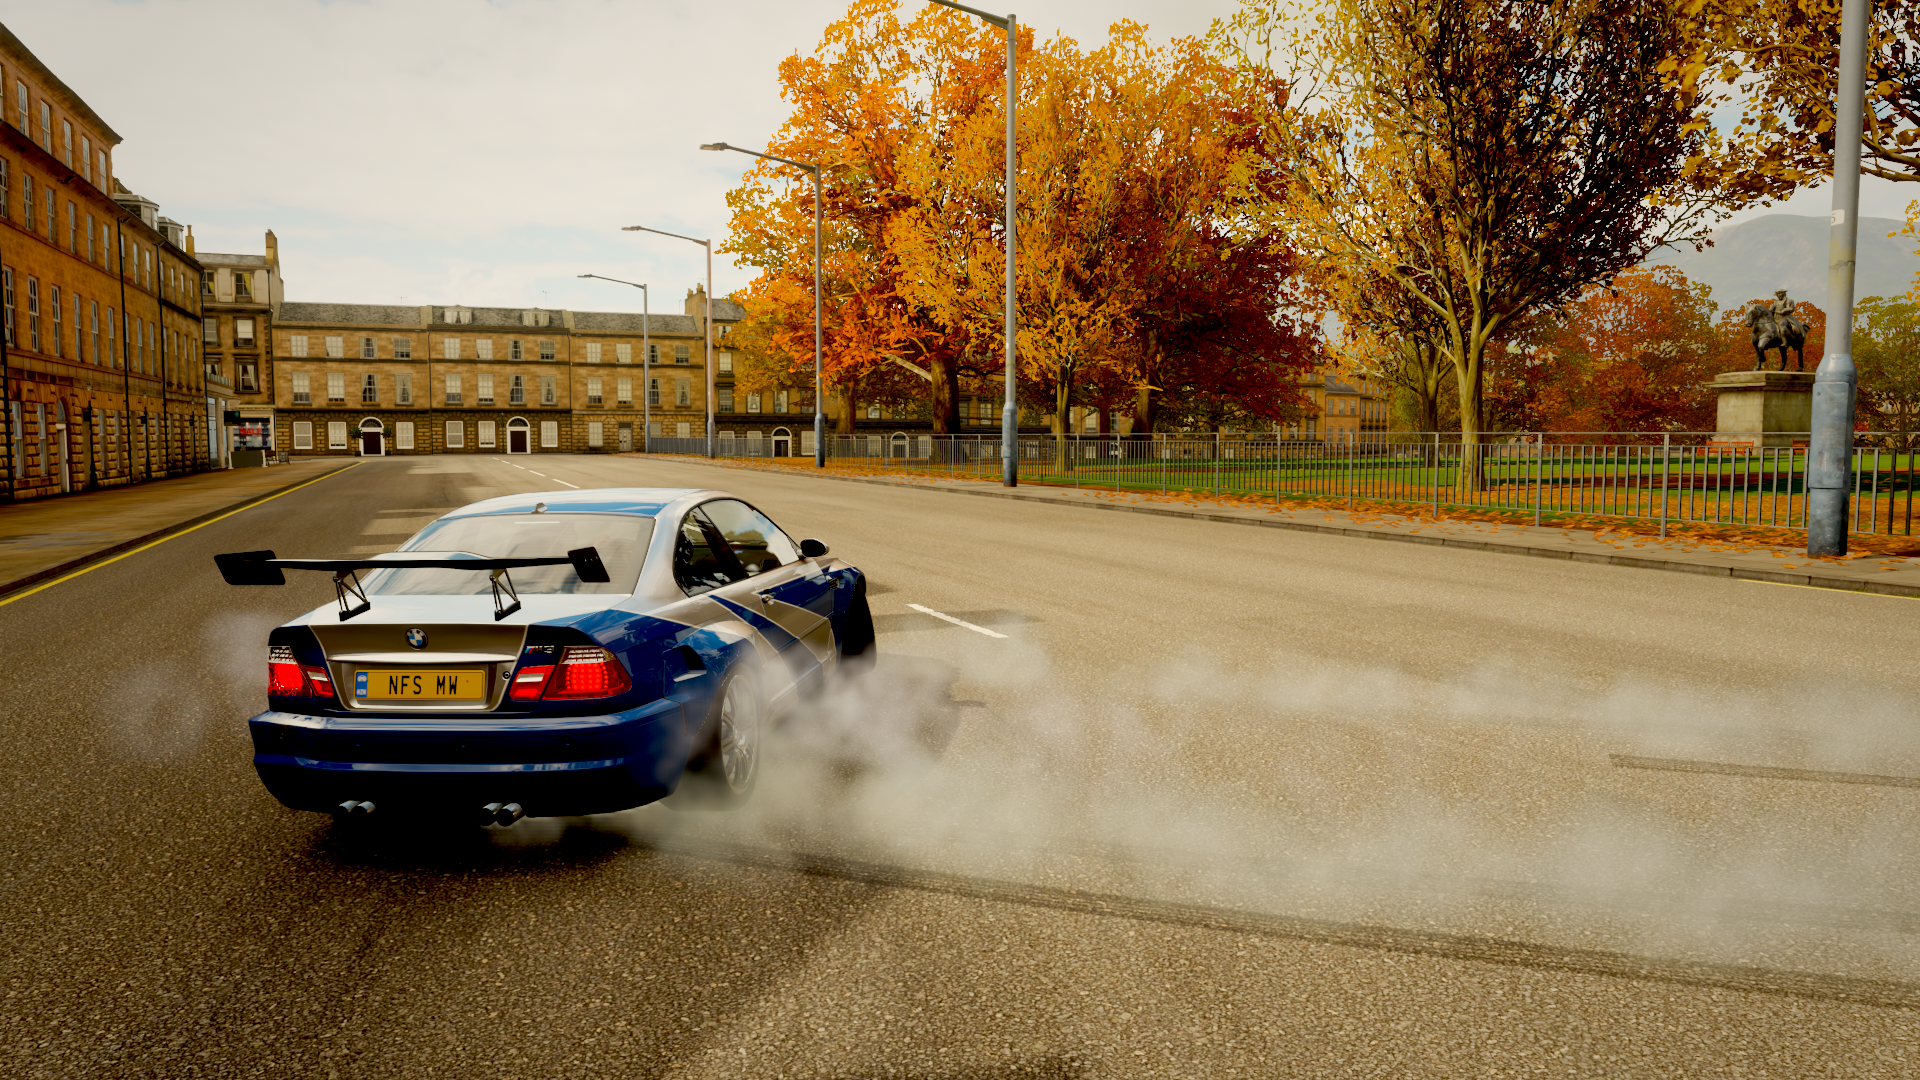 Bmw Bmw M3 E46 Forza Horizon 4 Need For Speed Need For Speed Most Wanted Drifting Bmw M3 E46 Gtr Bmw E46 Bmw 3 Series Sunset Fall 1920x1080 Wallpaper Wallhaven Cc